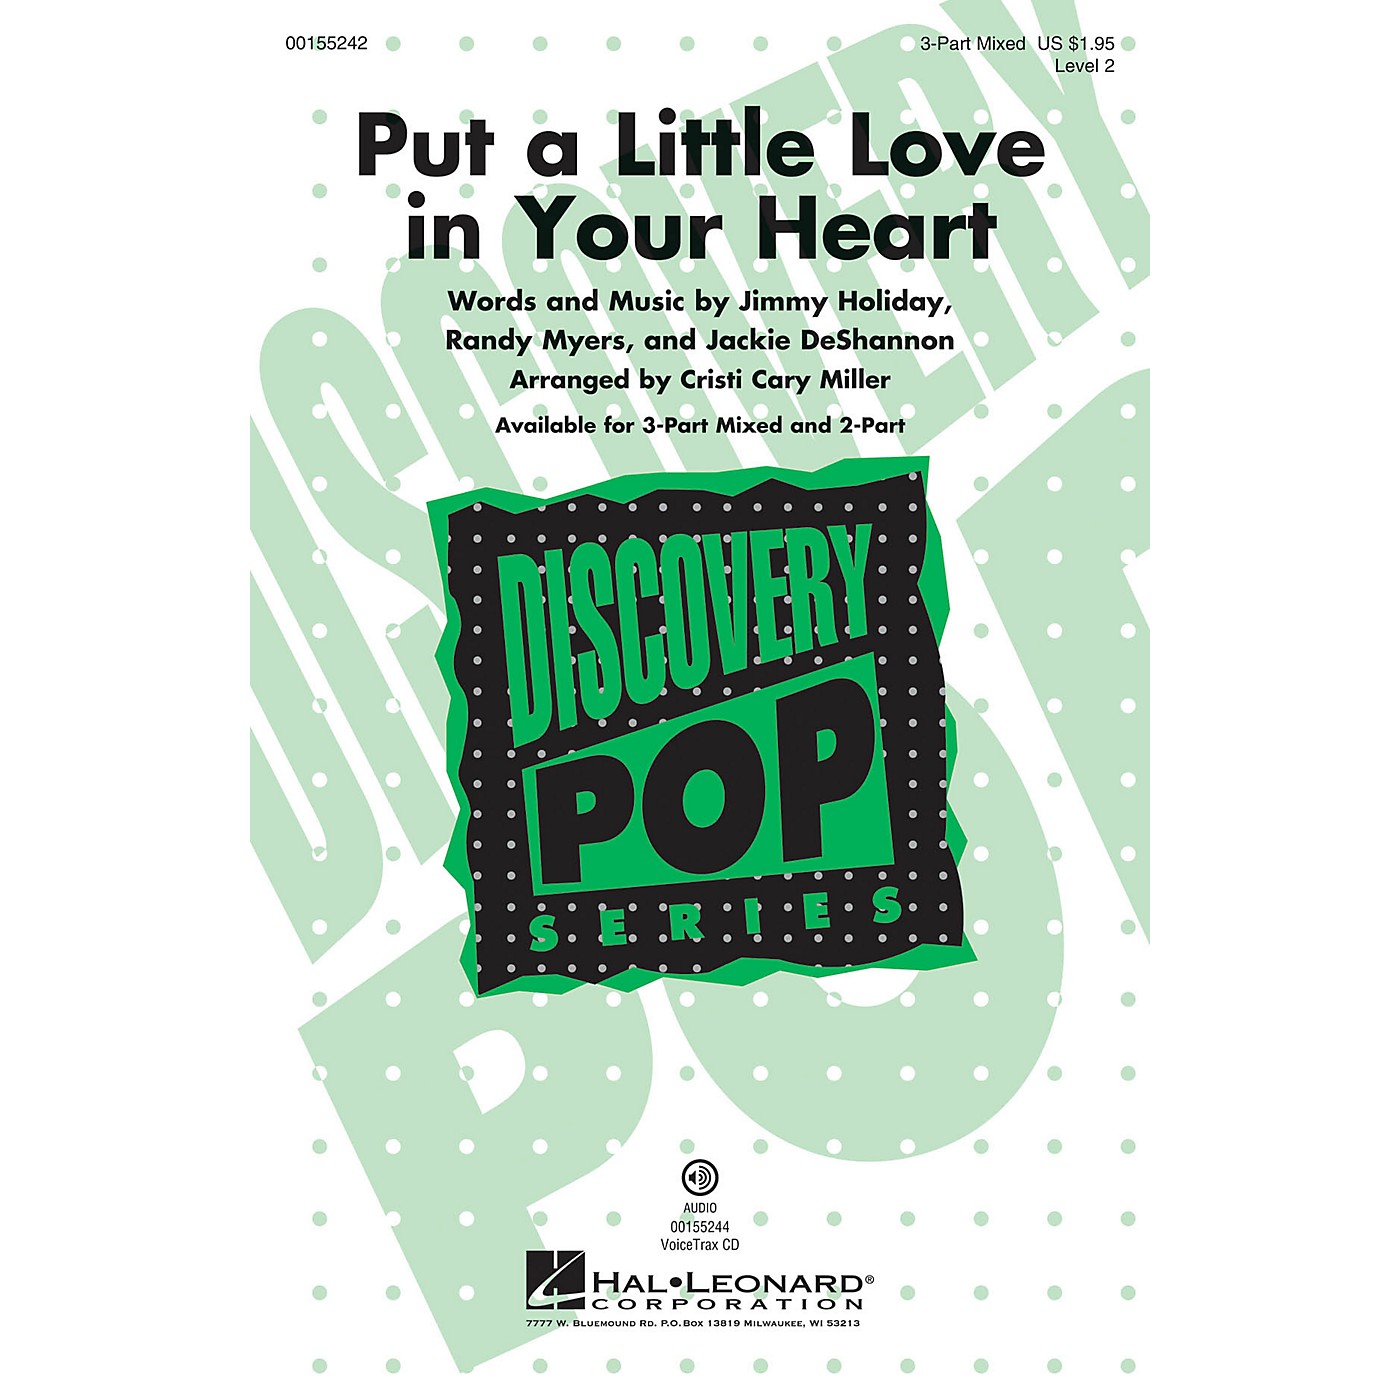 Hal Leonard Put a Little Love in Your Heart (Discovery Level 2) 3-Part Mixed arranged by Cristi Cary Miller thumbnail